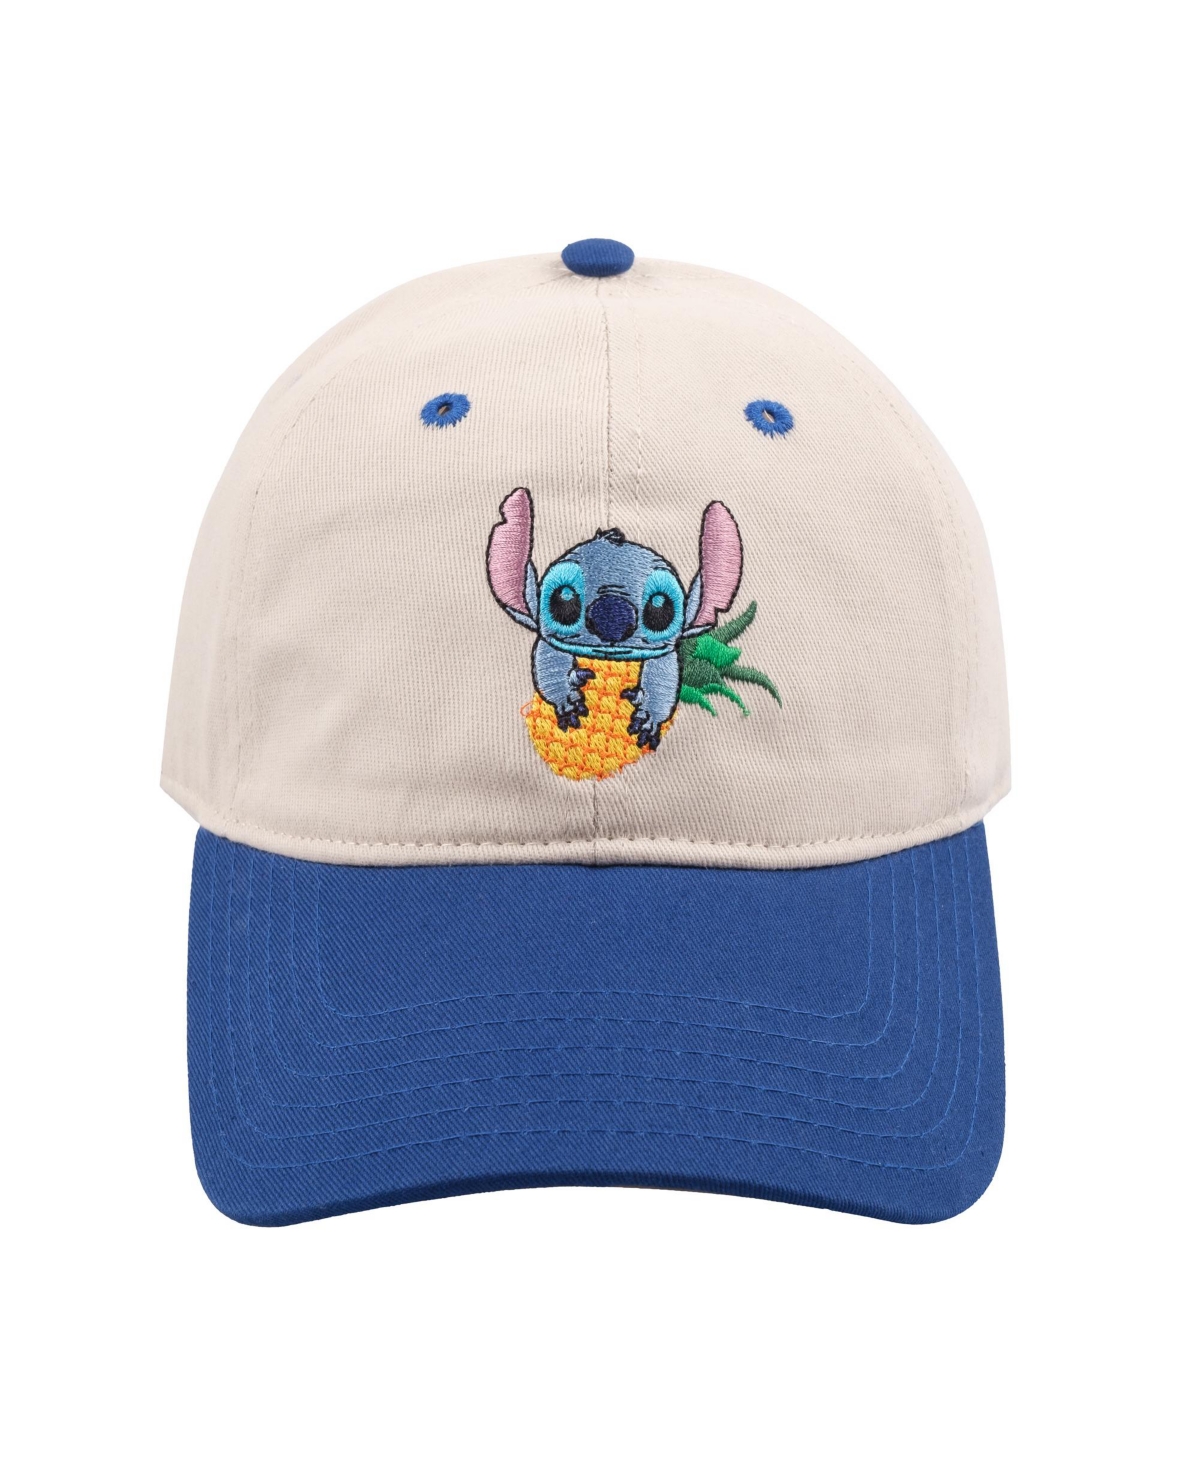 Disney's Lilo and Stitch Adjustable Baseball Hat with Curved Brim - Navy